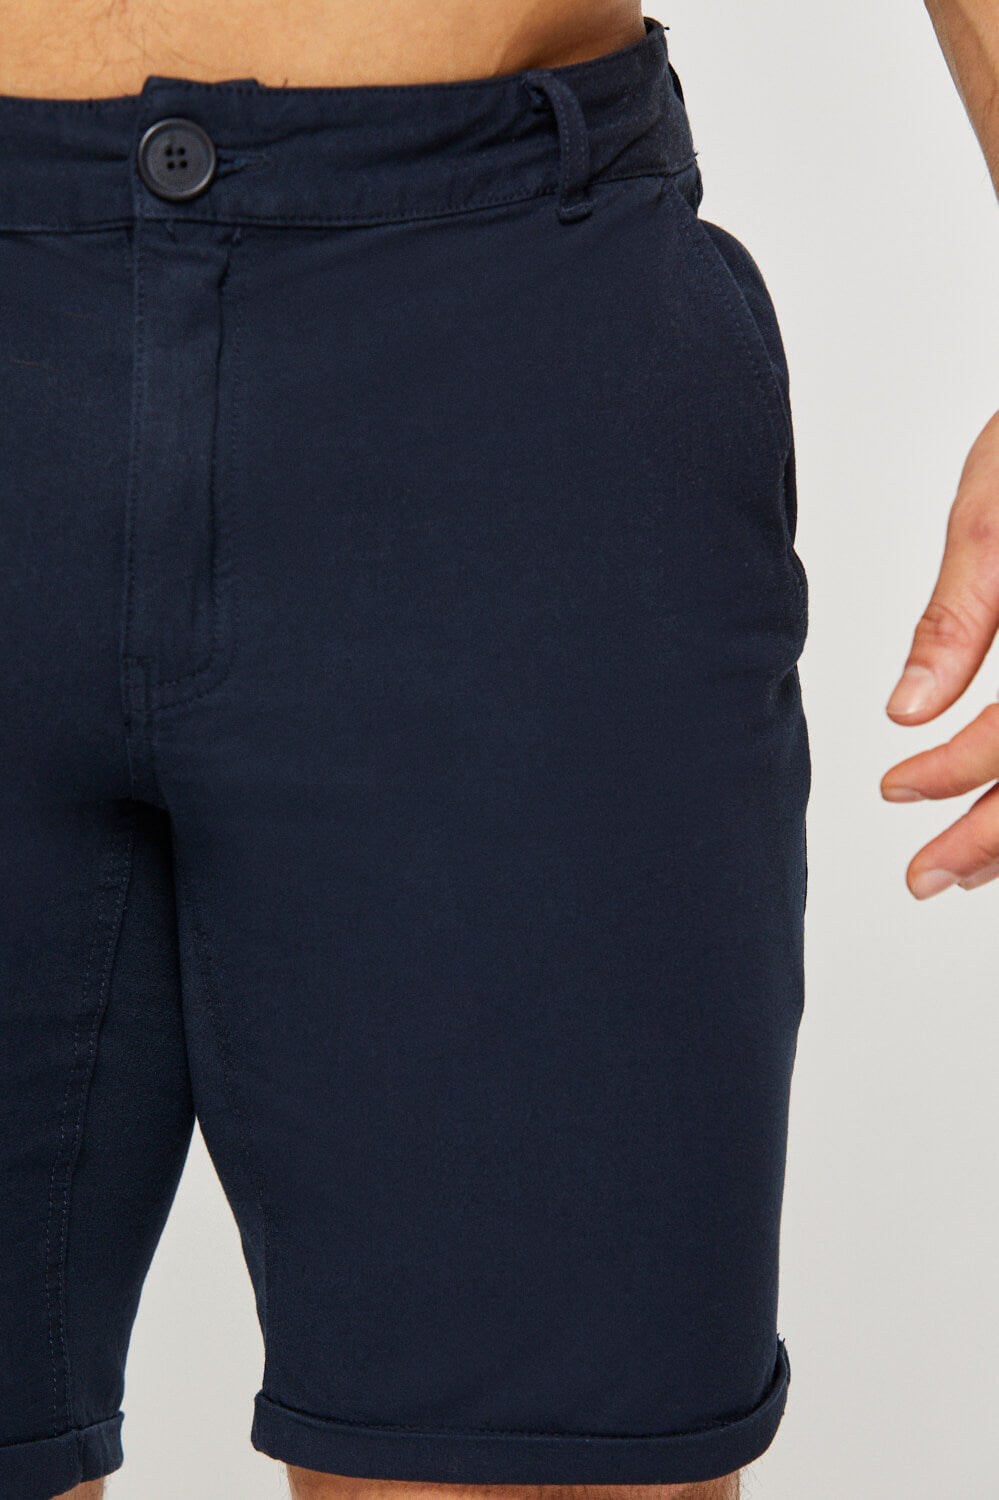 Essential - Shorts in ATHLETE Navy USA Chino - TAILORED